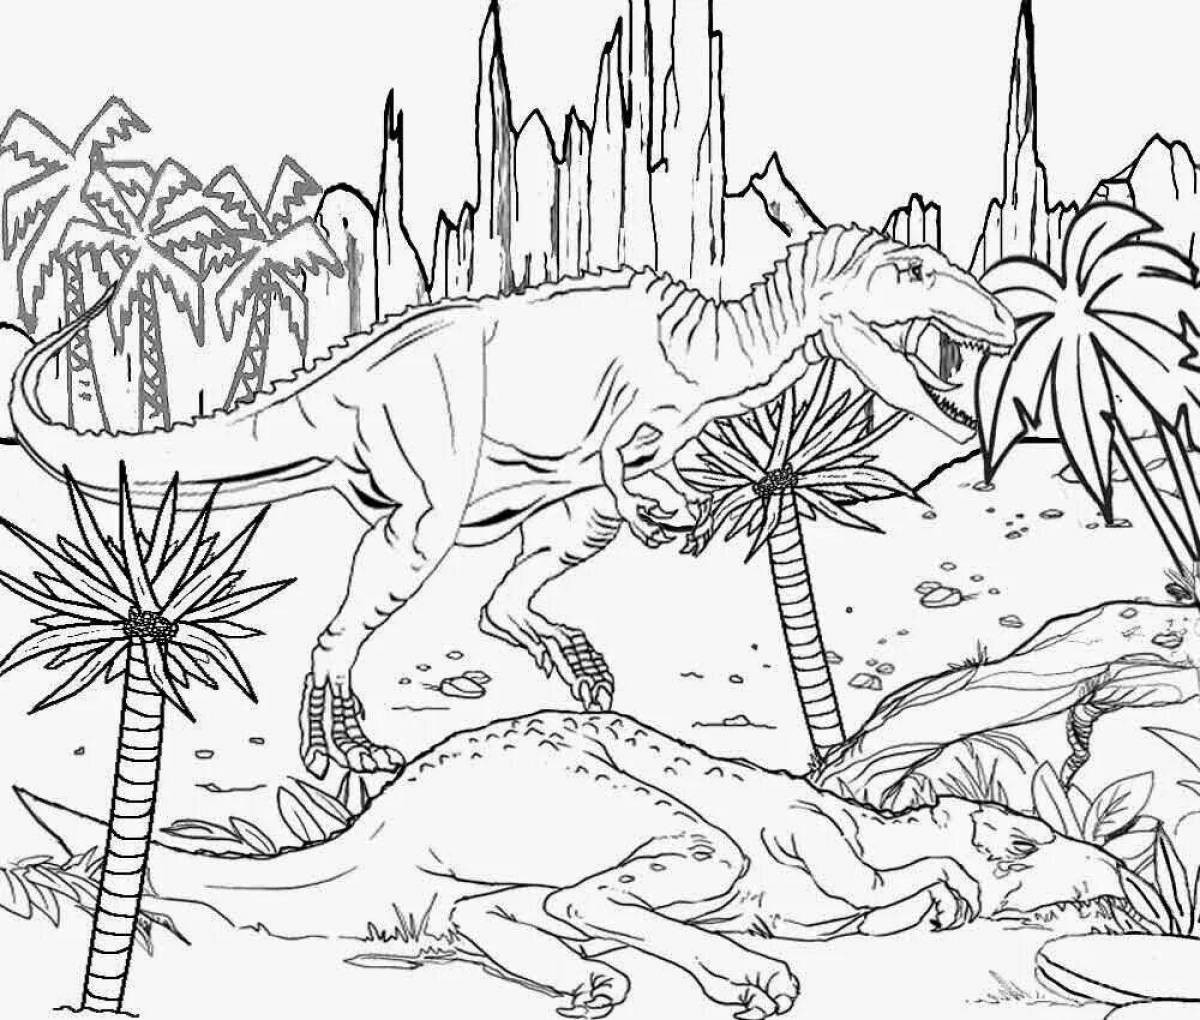 Adorable dinosaur world coloring page